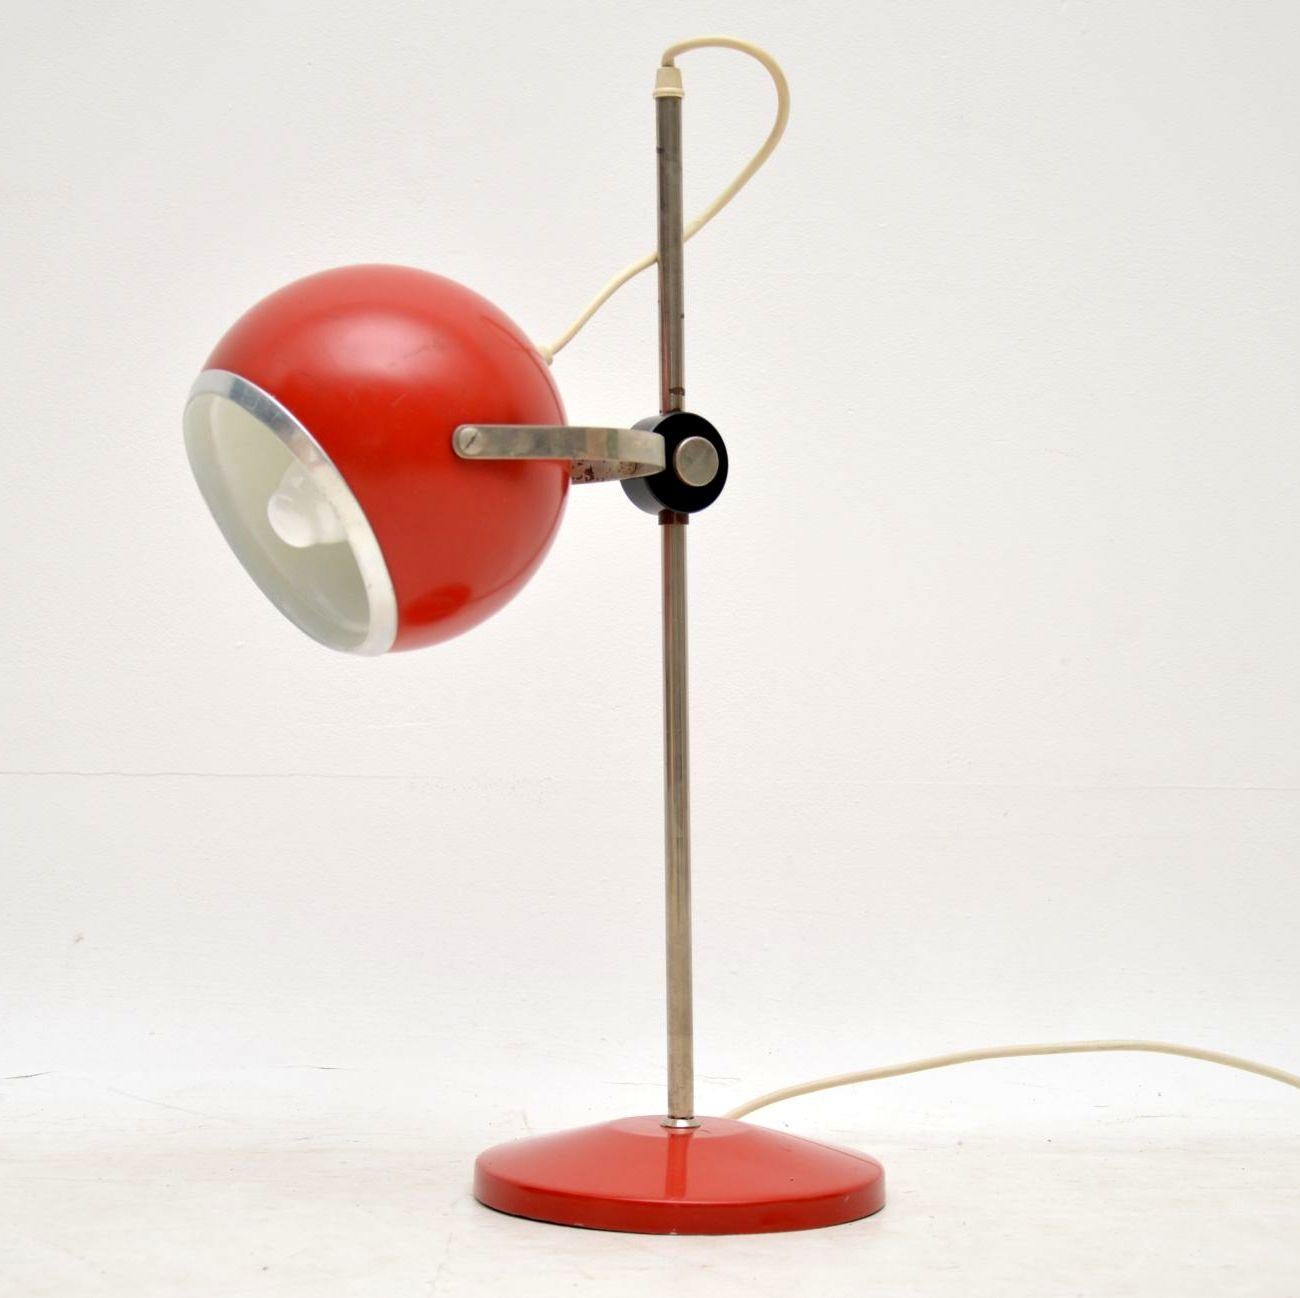 A lovely vintage desk or table lamp made in France, this dates from the 1960s. It’s made from steel, painted red on the shade and base. There is some minor surface wear here and there, seen in the images, this has been re-wired and PAT tested for